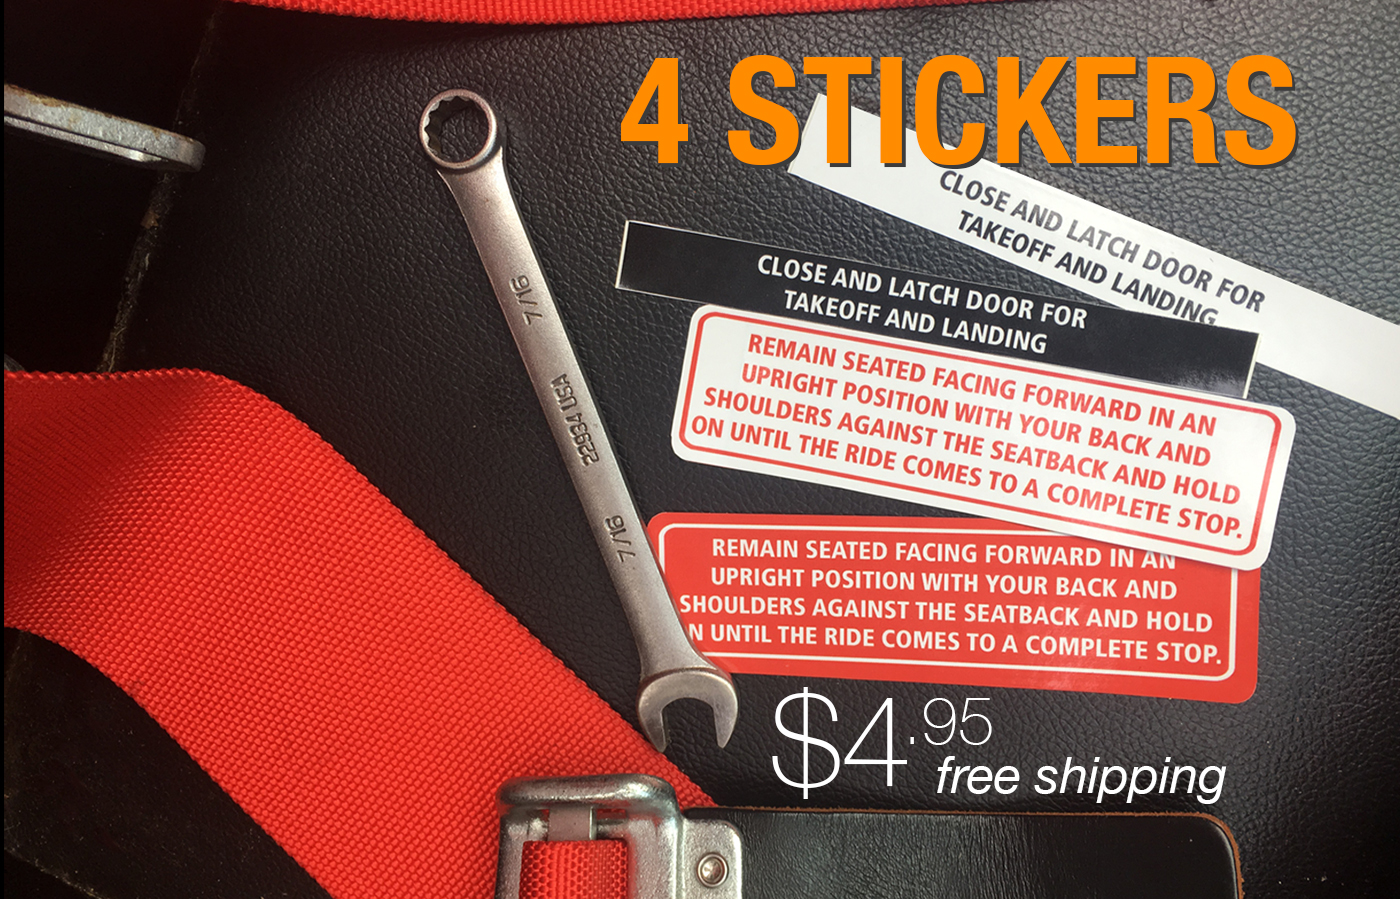 4 stickers for $4.95